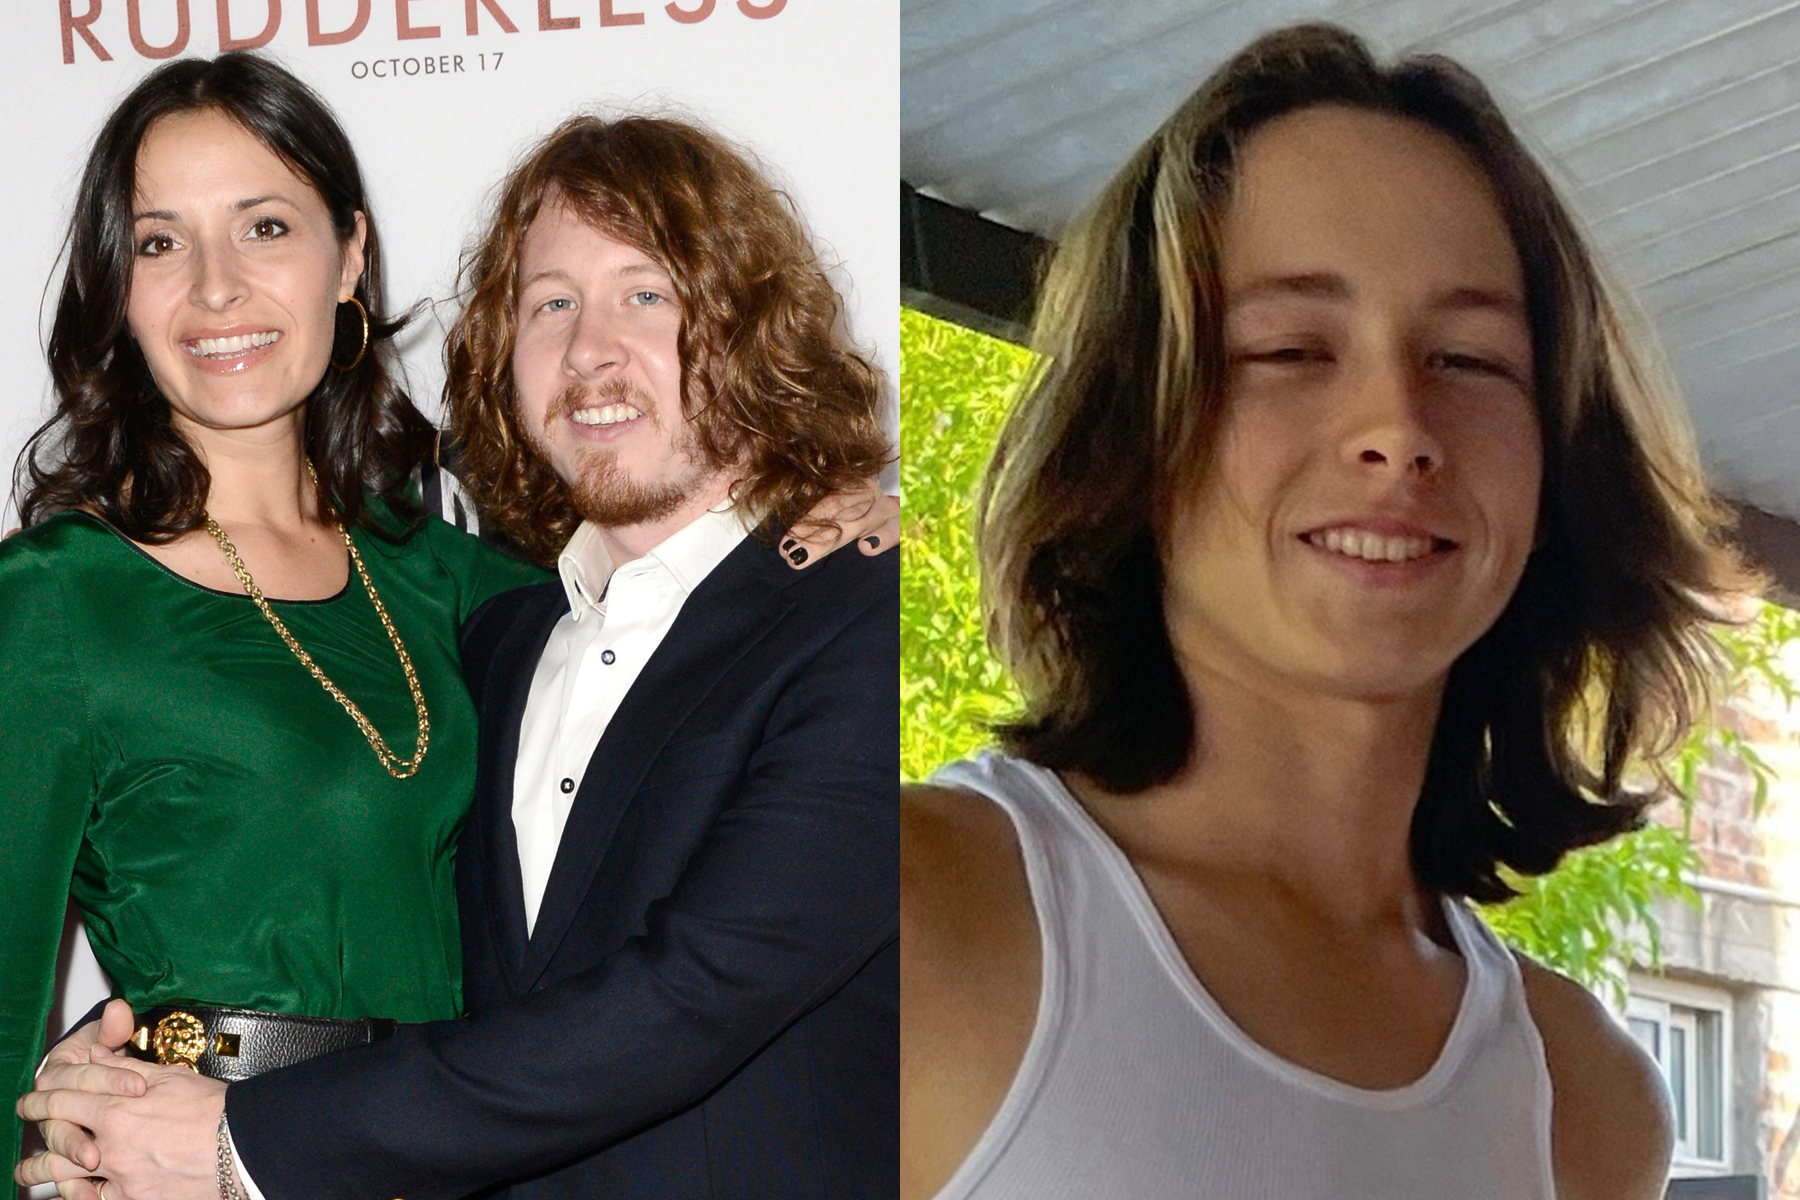 <p>Grammy-nominated musician Ben Kweller and wife Liz Smith Kweller shared heartbreaking news on Feb. 28, 2023: They lost their oldest child, 16-year-old son Dorian, in a car accident. "There's no way that I can be typing this but I am…. Our son, Dorian Zev Kweller, was killed last night. He was only 16 and he was a true legend," Ben shared on Instagram alongside this photo of his son (right). "Kindest, gentle soul, a friend to all. If you knew him, you know. We'll never get over him as long as we're here on earth. Please keep his spirit alive with your memories and the music he made: @reallyzev." </p><p>Like his father, the teen was a musician. "Dorian Zev wrote and recorded songs every day. A true poet from the day he started speaking. Only a few of his recordings were released but he was on a path and excited about his journey. He had so many plans!!!" Ben, a former member of the band Radish, added. "His first gig was in two weeks, at SXSW. My last text with him was about the merch he wanted to make. My baby boy was at the starting line with so much life ahead of him…" Ben concluded, "I have no idea why things like this happen. We're in complete shock and don't know what the future holds. Lizzy, [our younger son] Judah, and I have no idea how to deal with this disaster. Thank you for your prayers and support and we apologize if we are slow to respond to messages."</p>